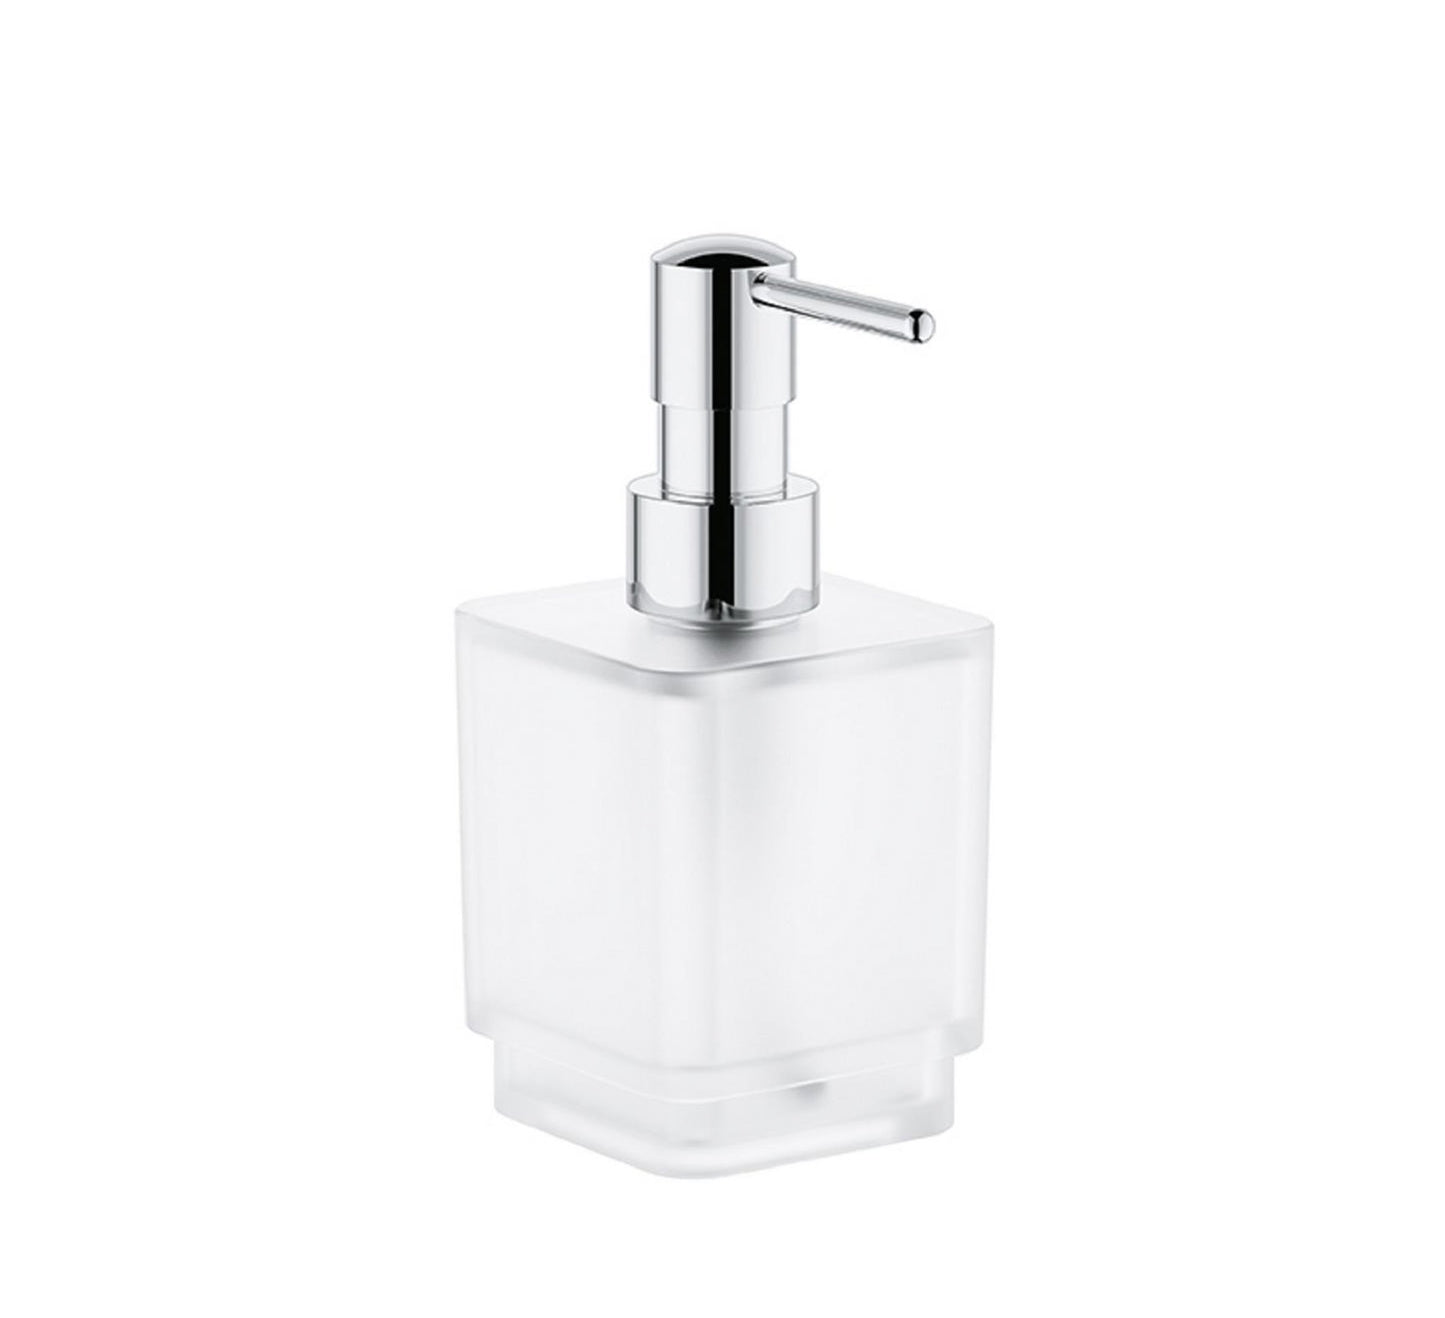 GROHE SELECTION CUBE SOAP DISPENSER - 40805000 - Tadmur Trading